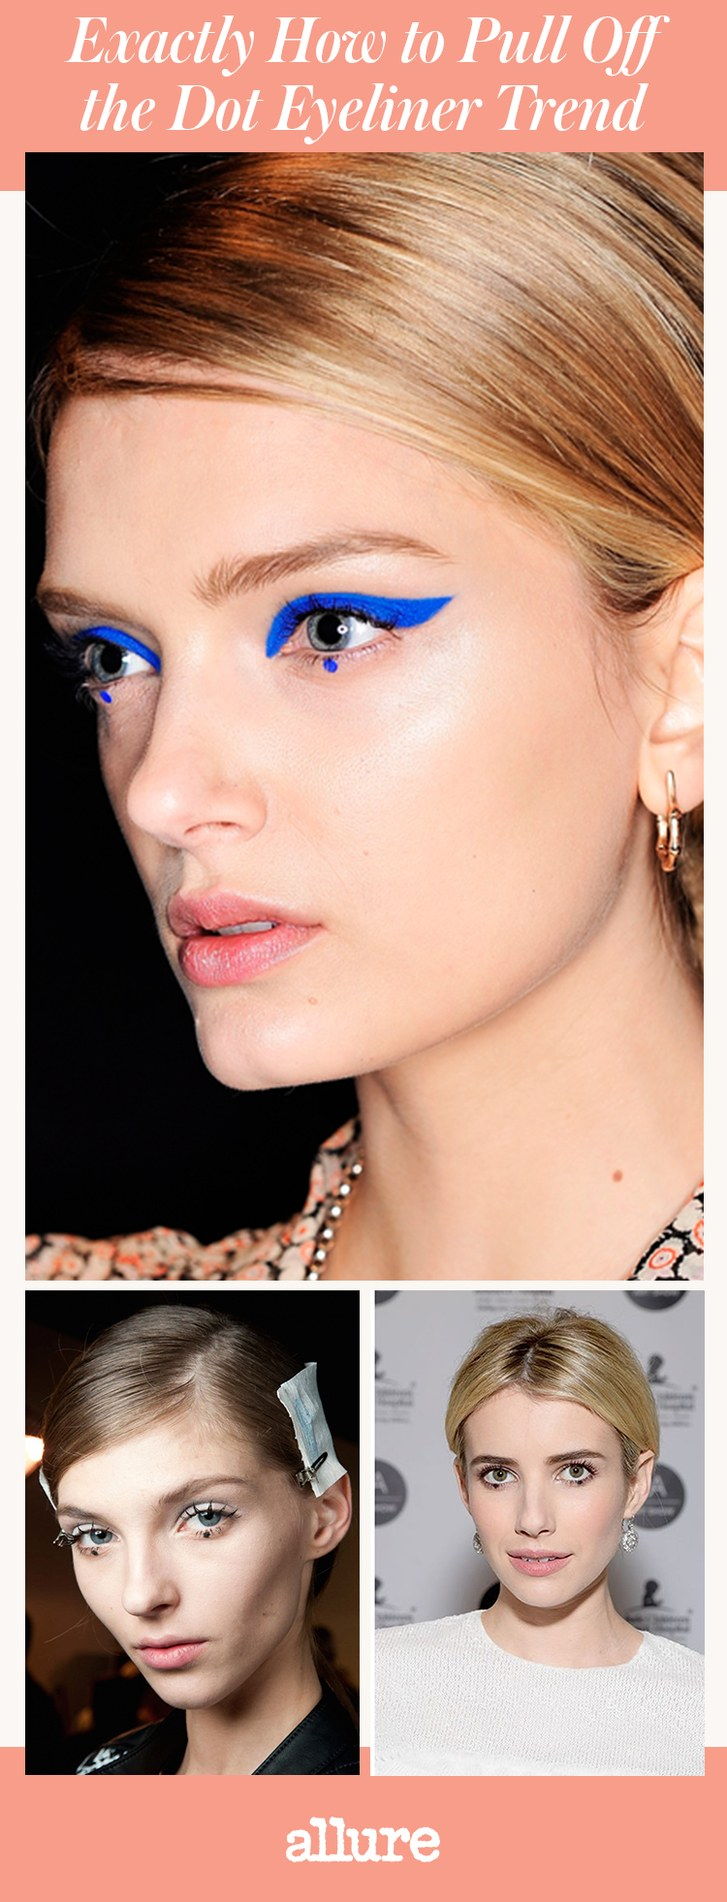 De Dot Eyeliner Trend: Here's Exactly How to Pull It Off